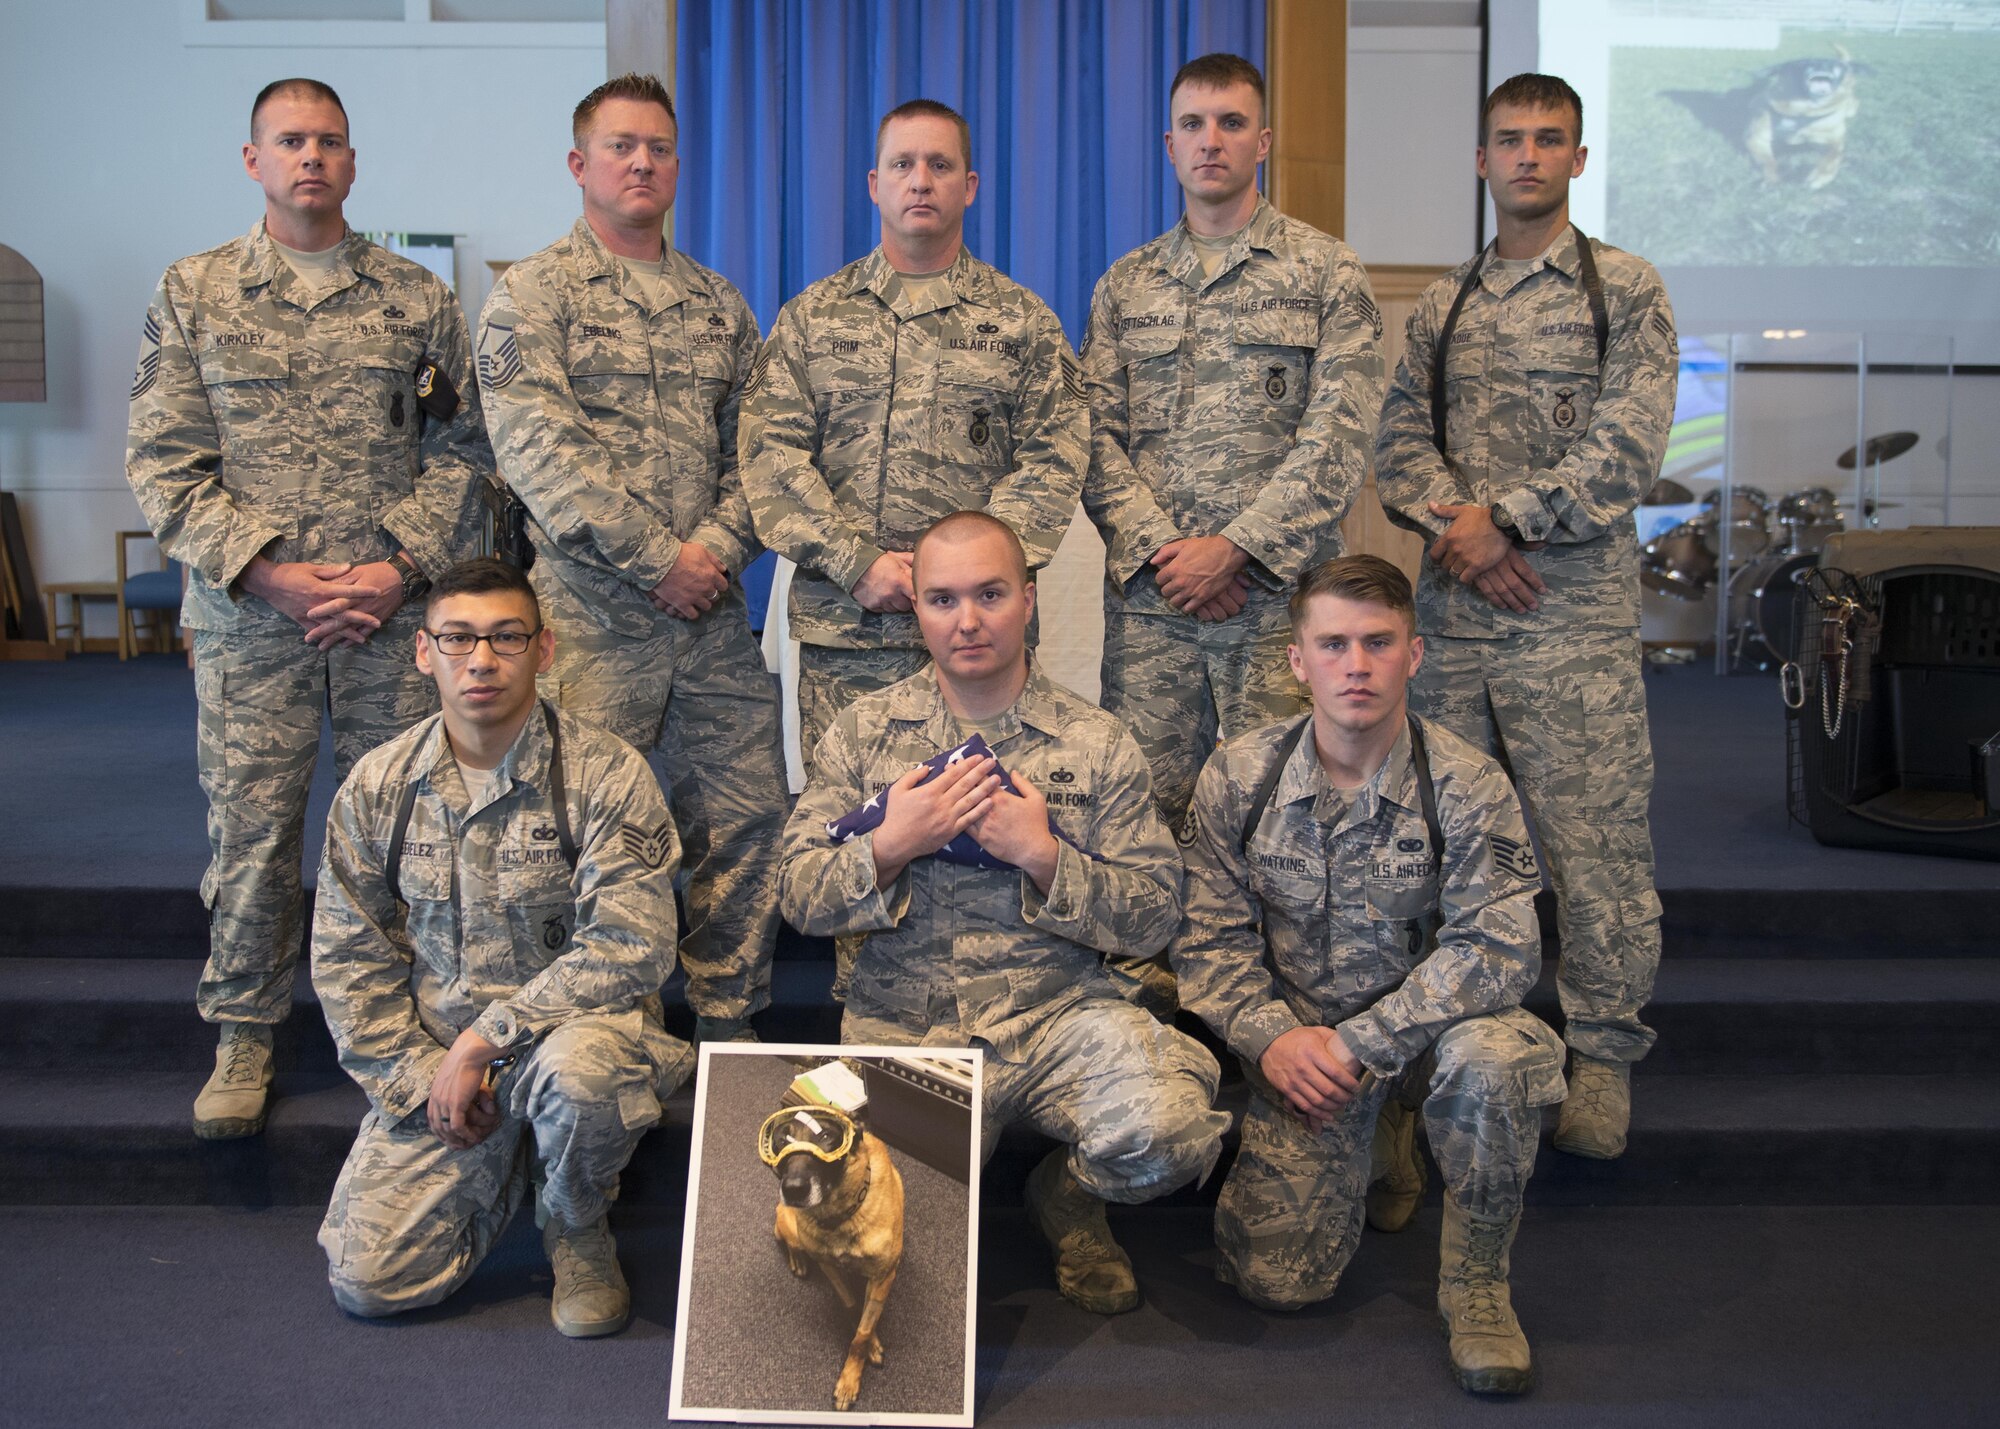 366th Security Forces Squadron working dog handlers pose for a photo after a memorial ceremony for military working dog Vvass Aug. 11, 2016, at Liberty Chapel on Mountain Home Air Force Base, Idaho. Vvass deployed twice as a Gunfighter serving in various locations around the world. (U.S. Air Force photo by Airman 1st Class Chester Mientkiewicz/Released)